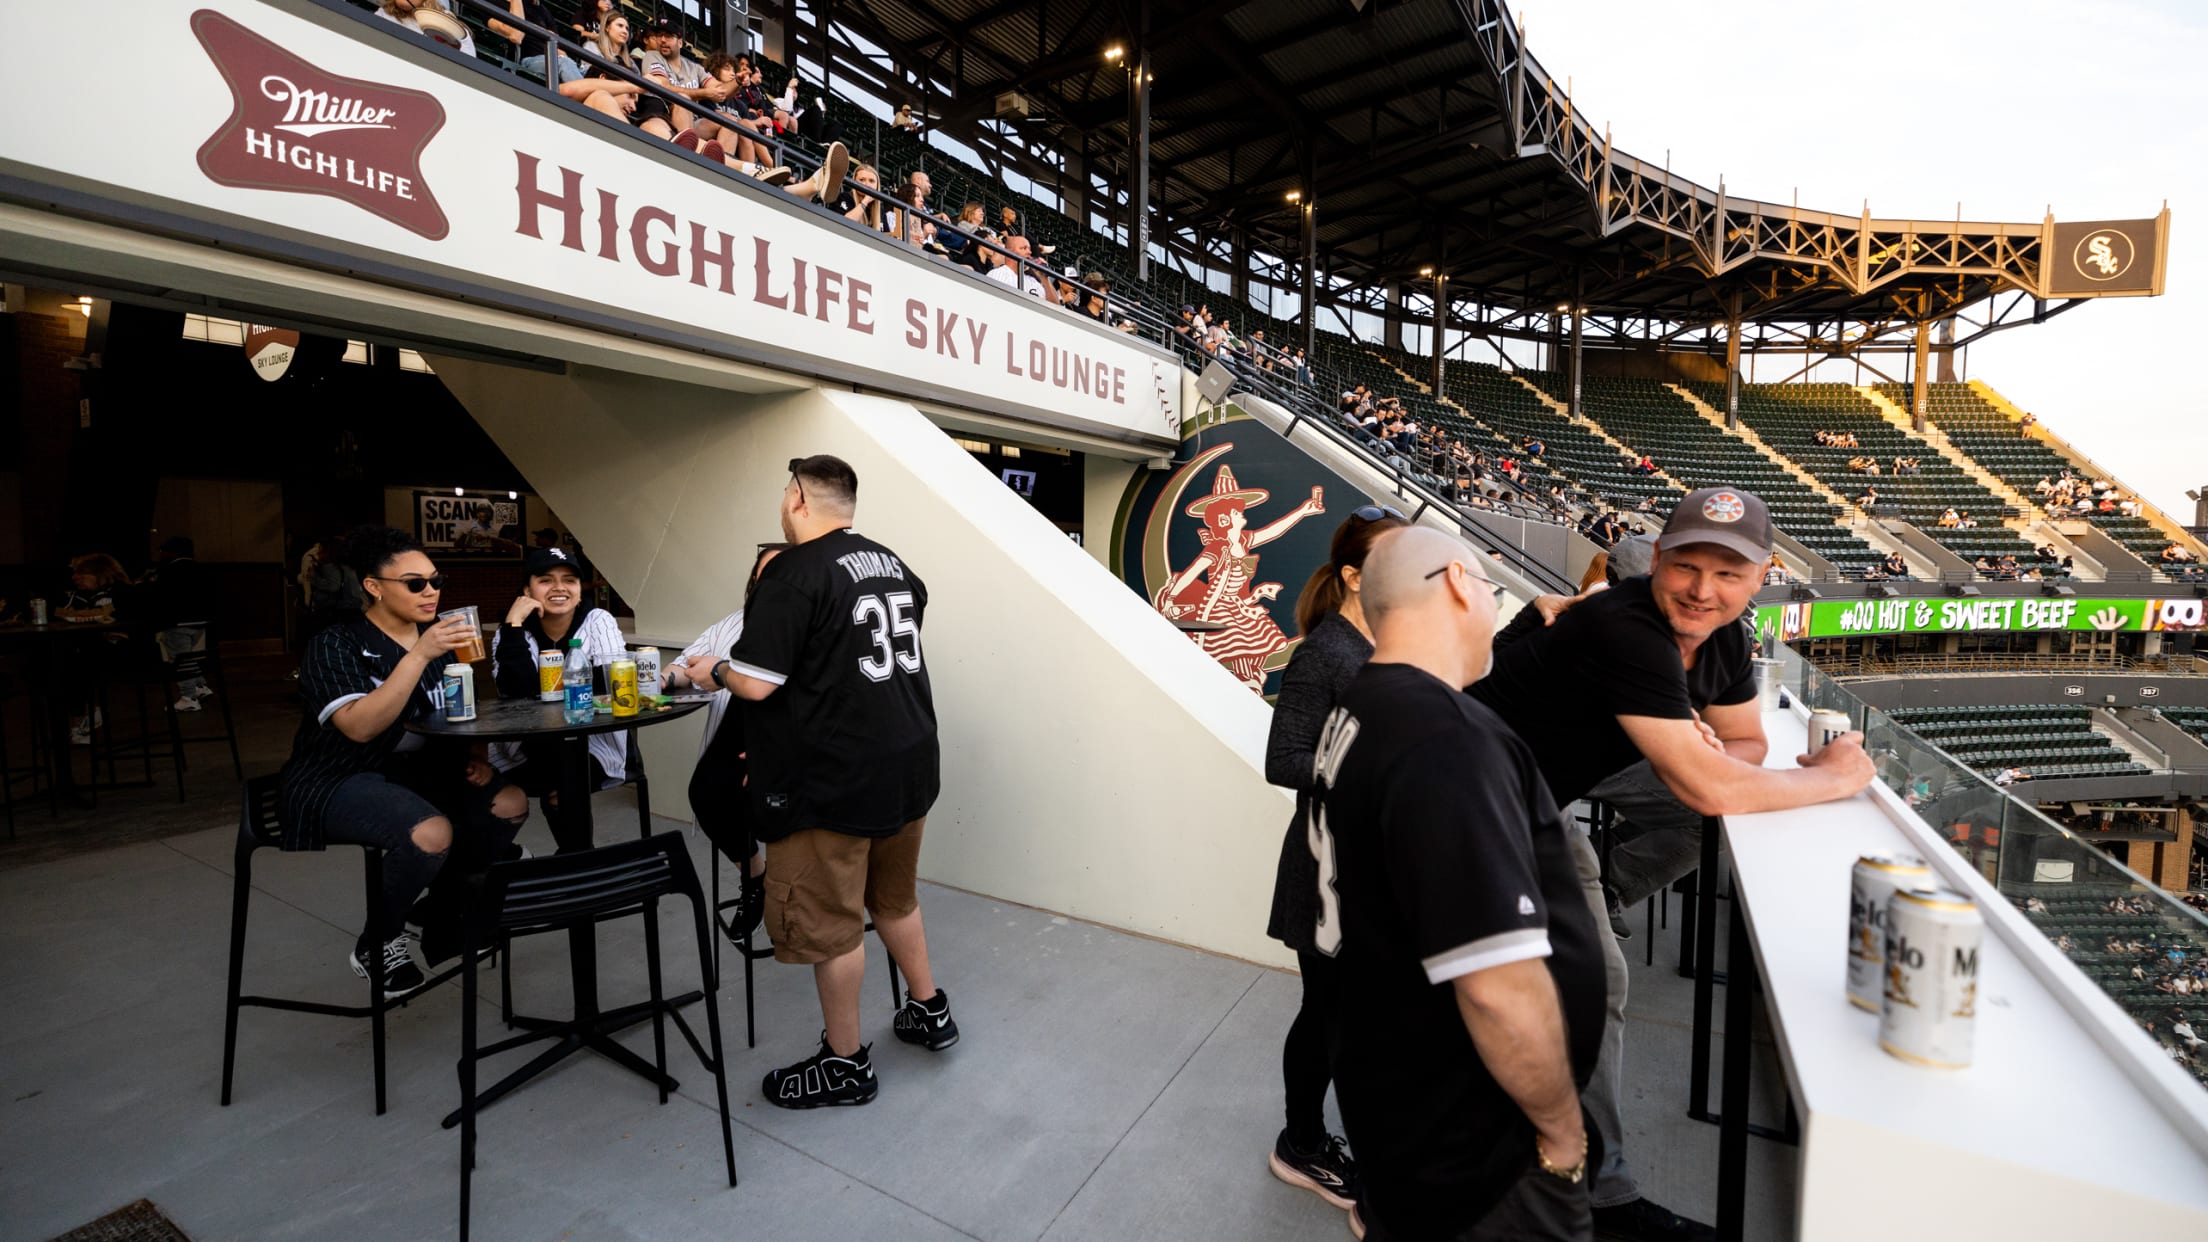 Chicago White Sox welcoming fans back at Guaranteed Rate Field for 1st time  since 2019 for home opener against Kansas City Royals - ABC7 Chicago